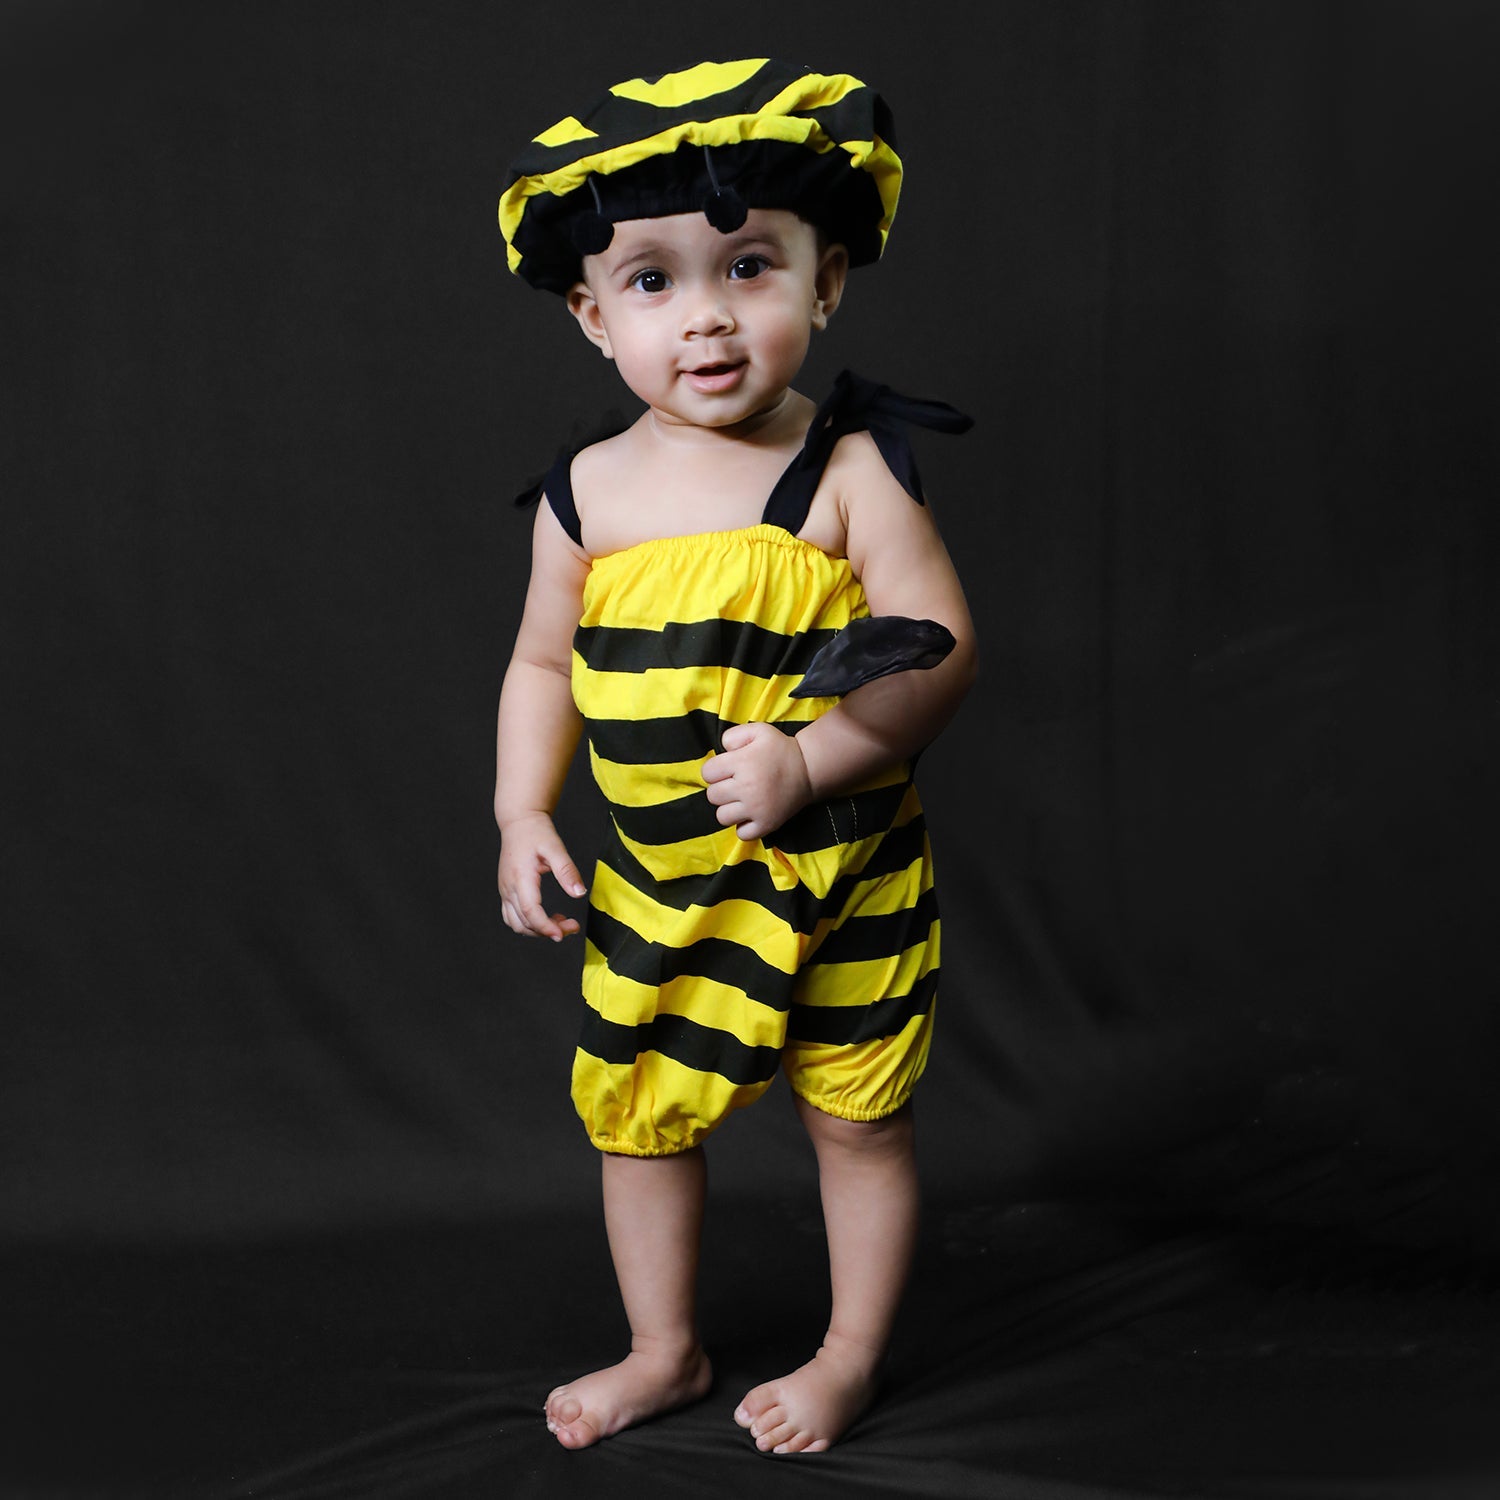 Baby Moo Bumble Bee Costume 2pcs Cap And Fancy Dress - Yellow - Baby Moo